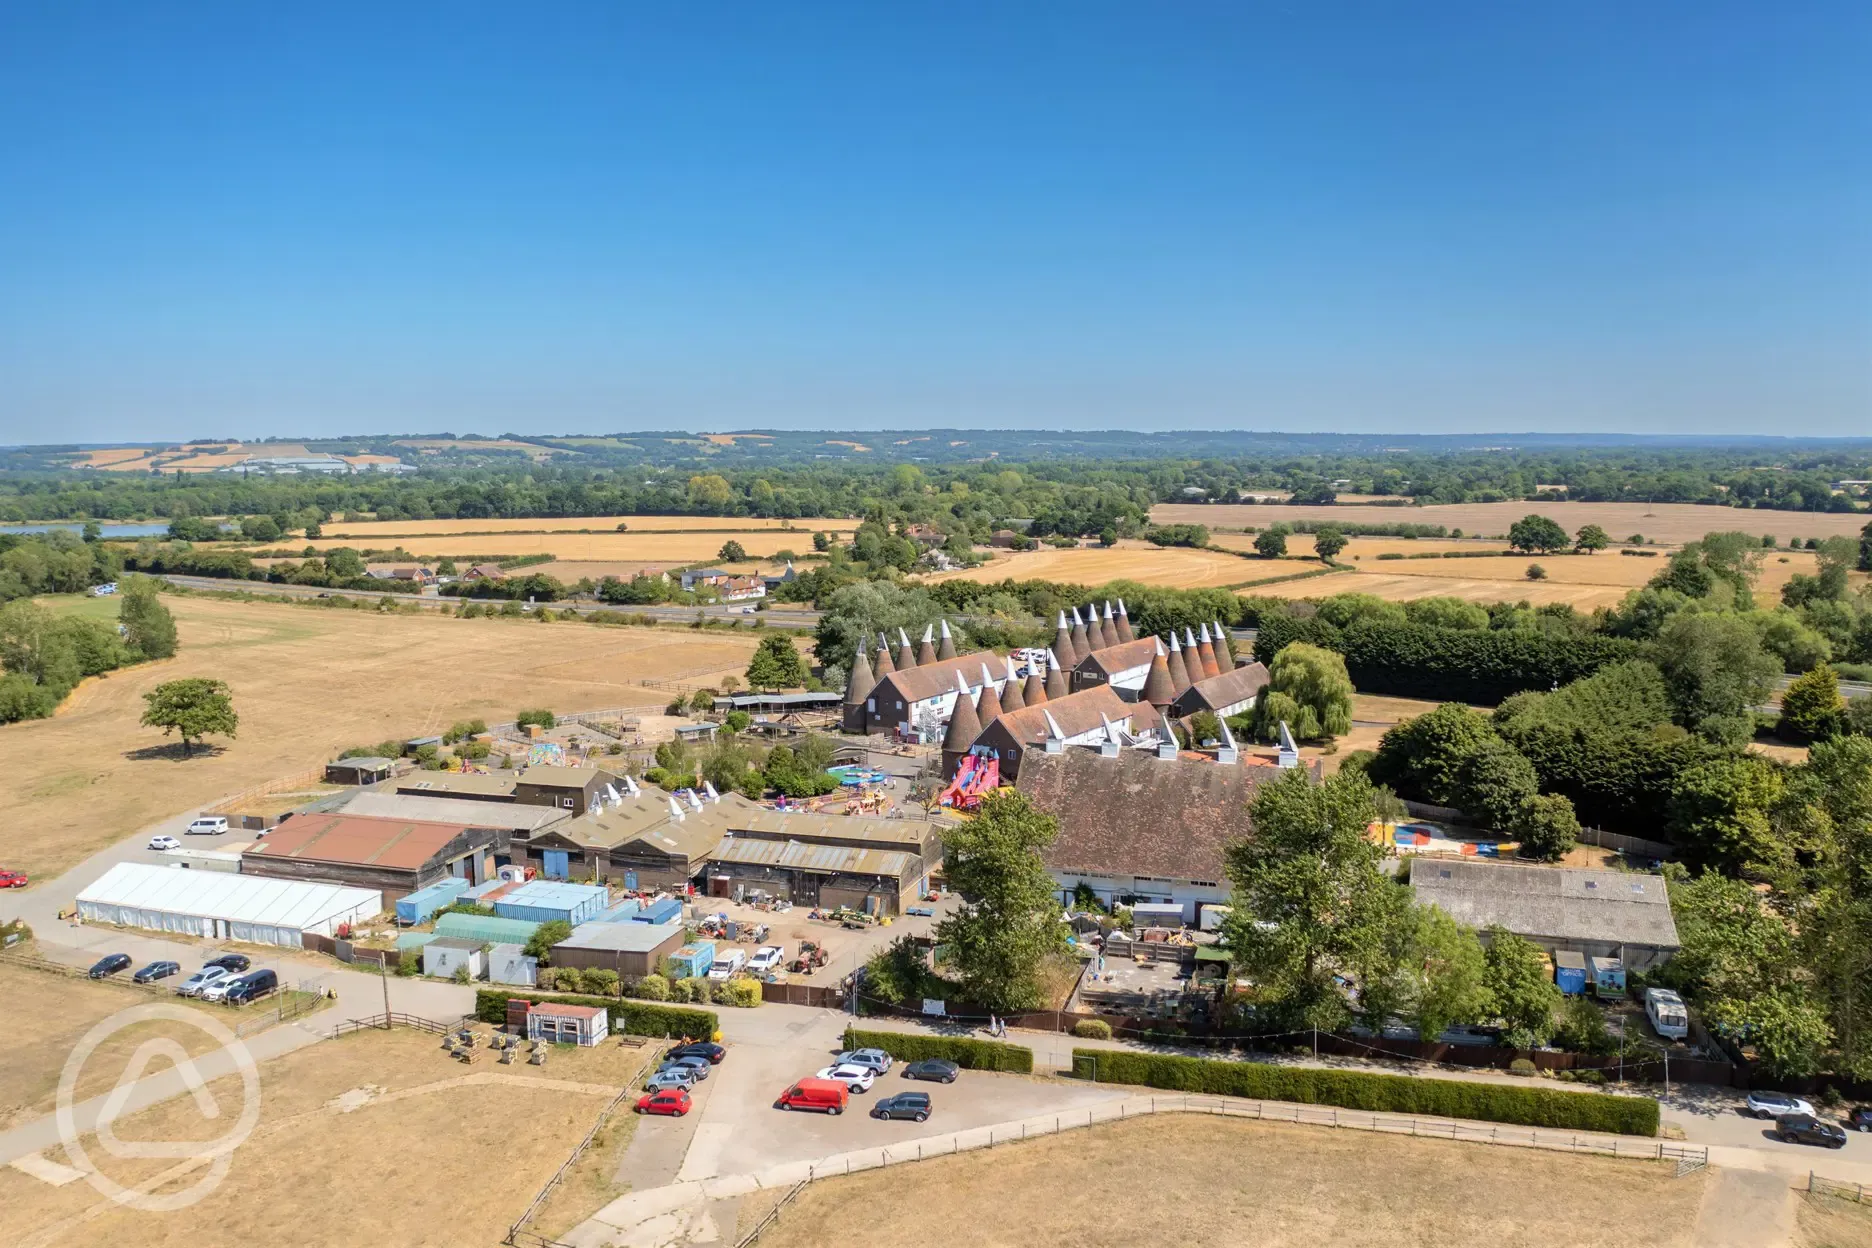 Aerial view of the Oast houses